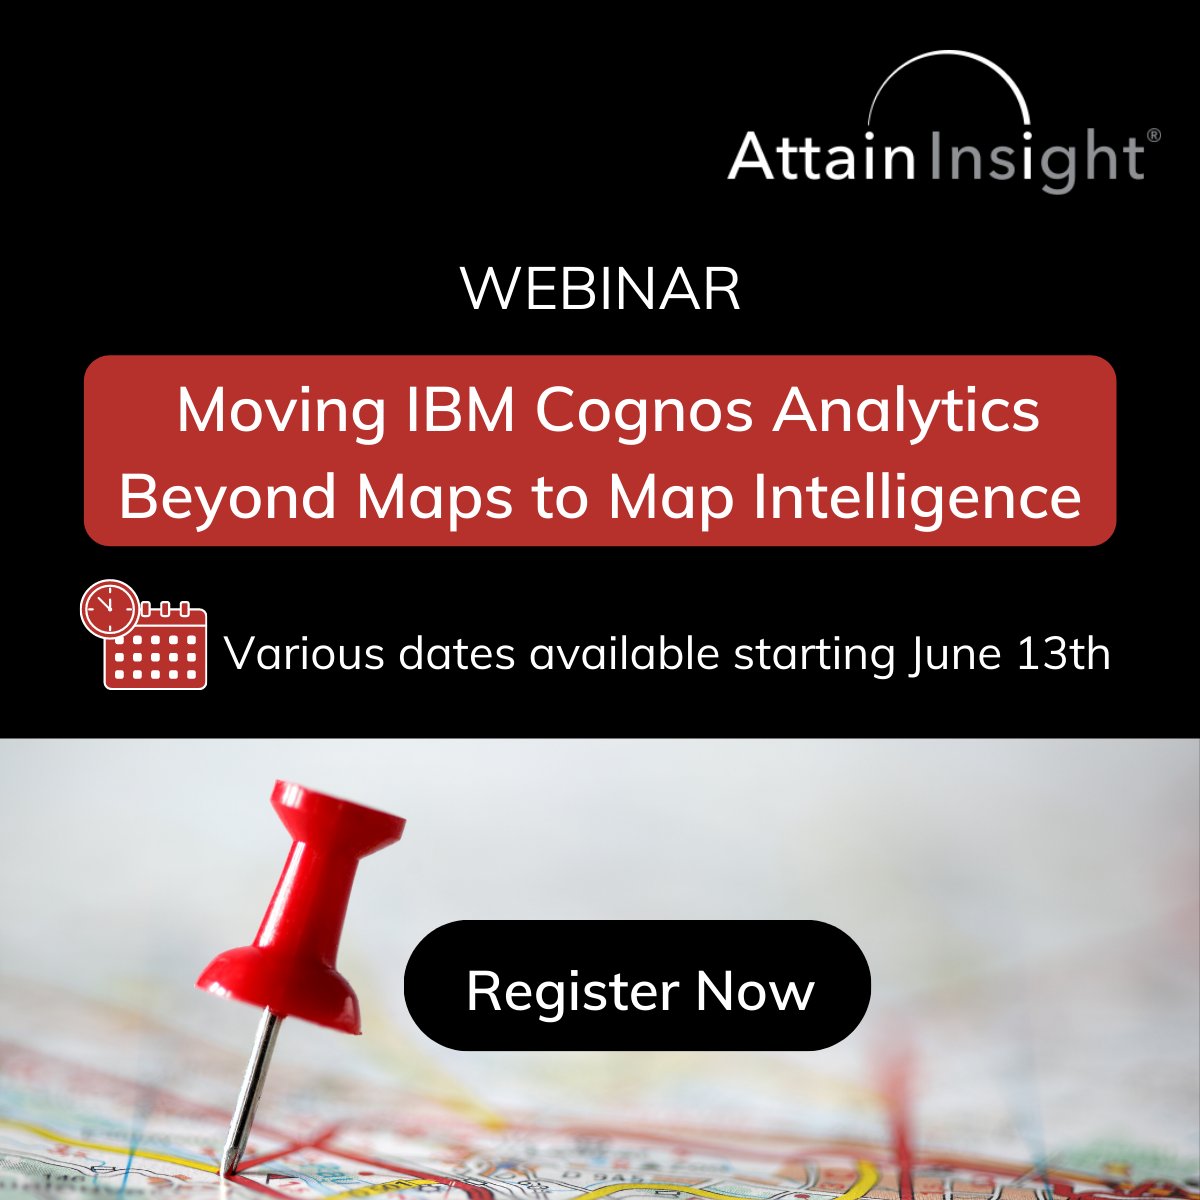 We are offering a free webinar to discuss “Moving IBM Cognos Analytics Beyond Maps to Map Intelligence” to help #Cognos users realize the full benefits of #LocationIntelligence. Register here:  attendee.gotowebinar.com/rt/23211453435…
 #IBMPartner #MapIntelligence #visualization #SpatialAnalytics